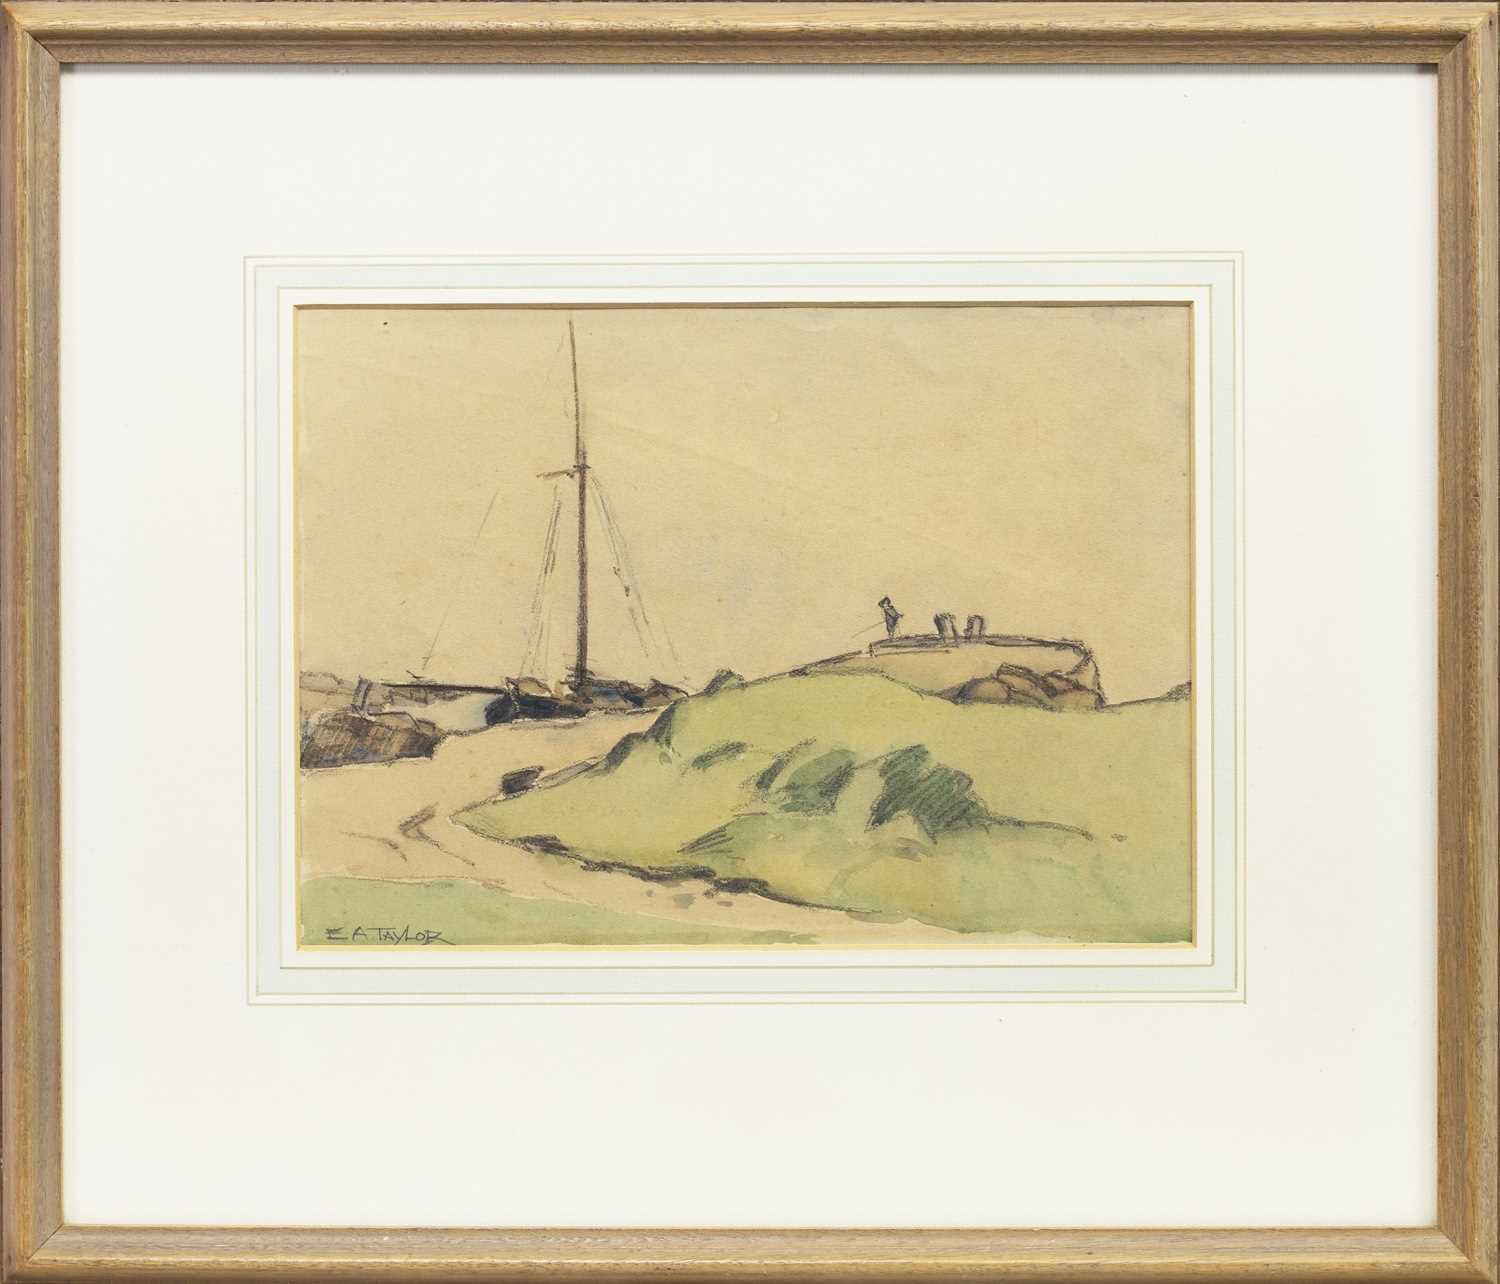 Lot 6 - COASTAL SCENE WITH YACHT AND ANGLER, A WATERCOLOUR BY E A TAYLOR